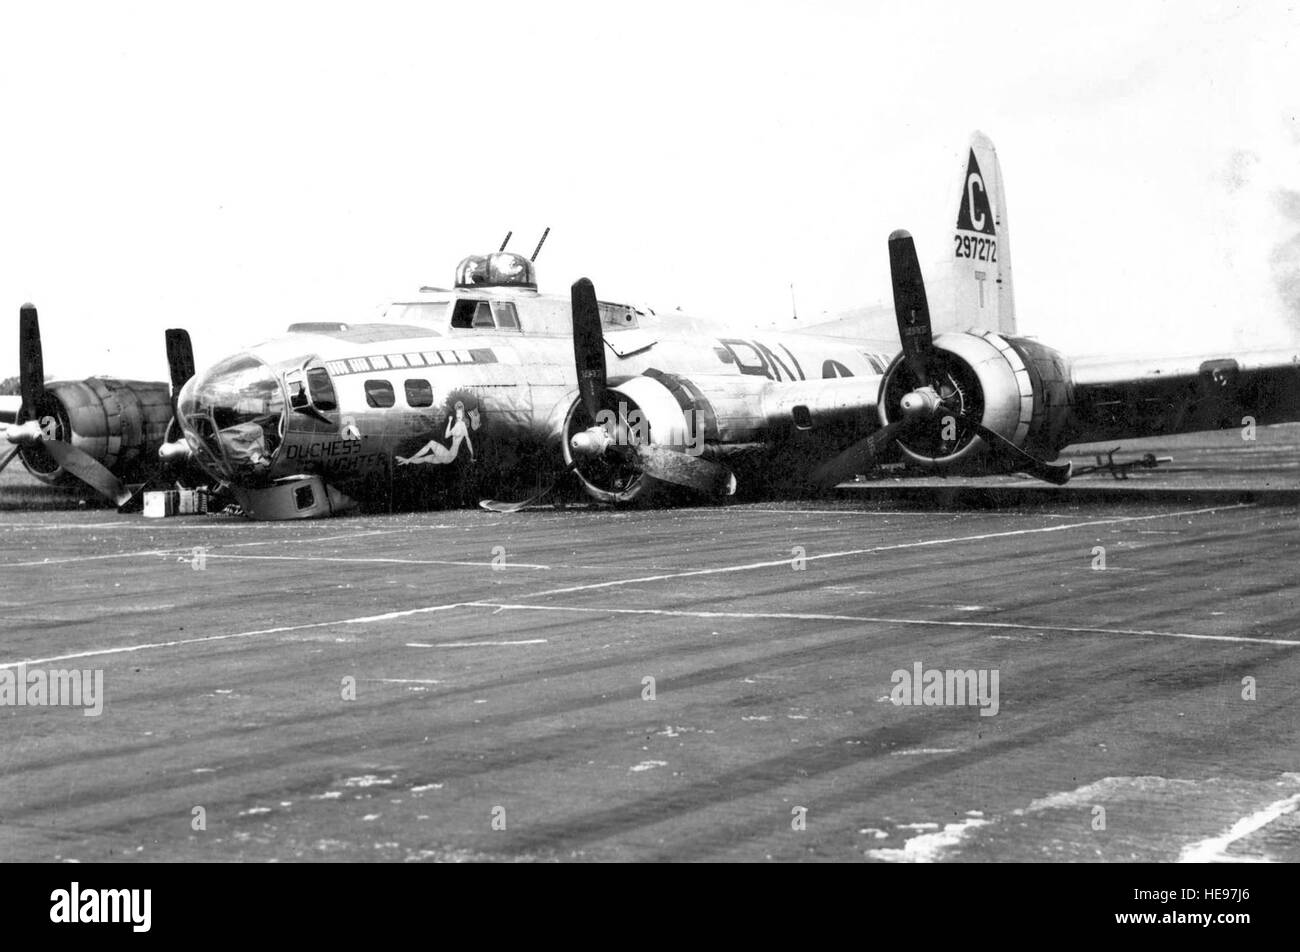 Emergency wheels-up landing of Boeing B-17G-45-BO (S/N 42-97272) (BN-T) 'Duchess Daughter' of the 303rd Bomb Group, 359th Bomb Squadron. Note: The original 'Duchess' (S/N 41-24561), also coded BN-T, was the aircraft in which Lt. Jack W. Mathis earned his Medal of Honor. Lt Mathis was lead bombardier for a mission on March 18, 1943, when the 'Duchess' was hit by flak. Lt. Mathis, although seriously wounded, completed the bomb run. He died soon after. (U.S. ) Stock Photo